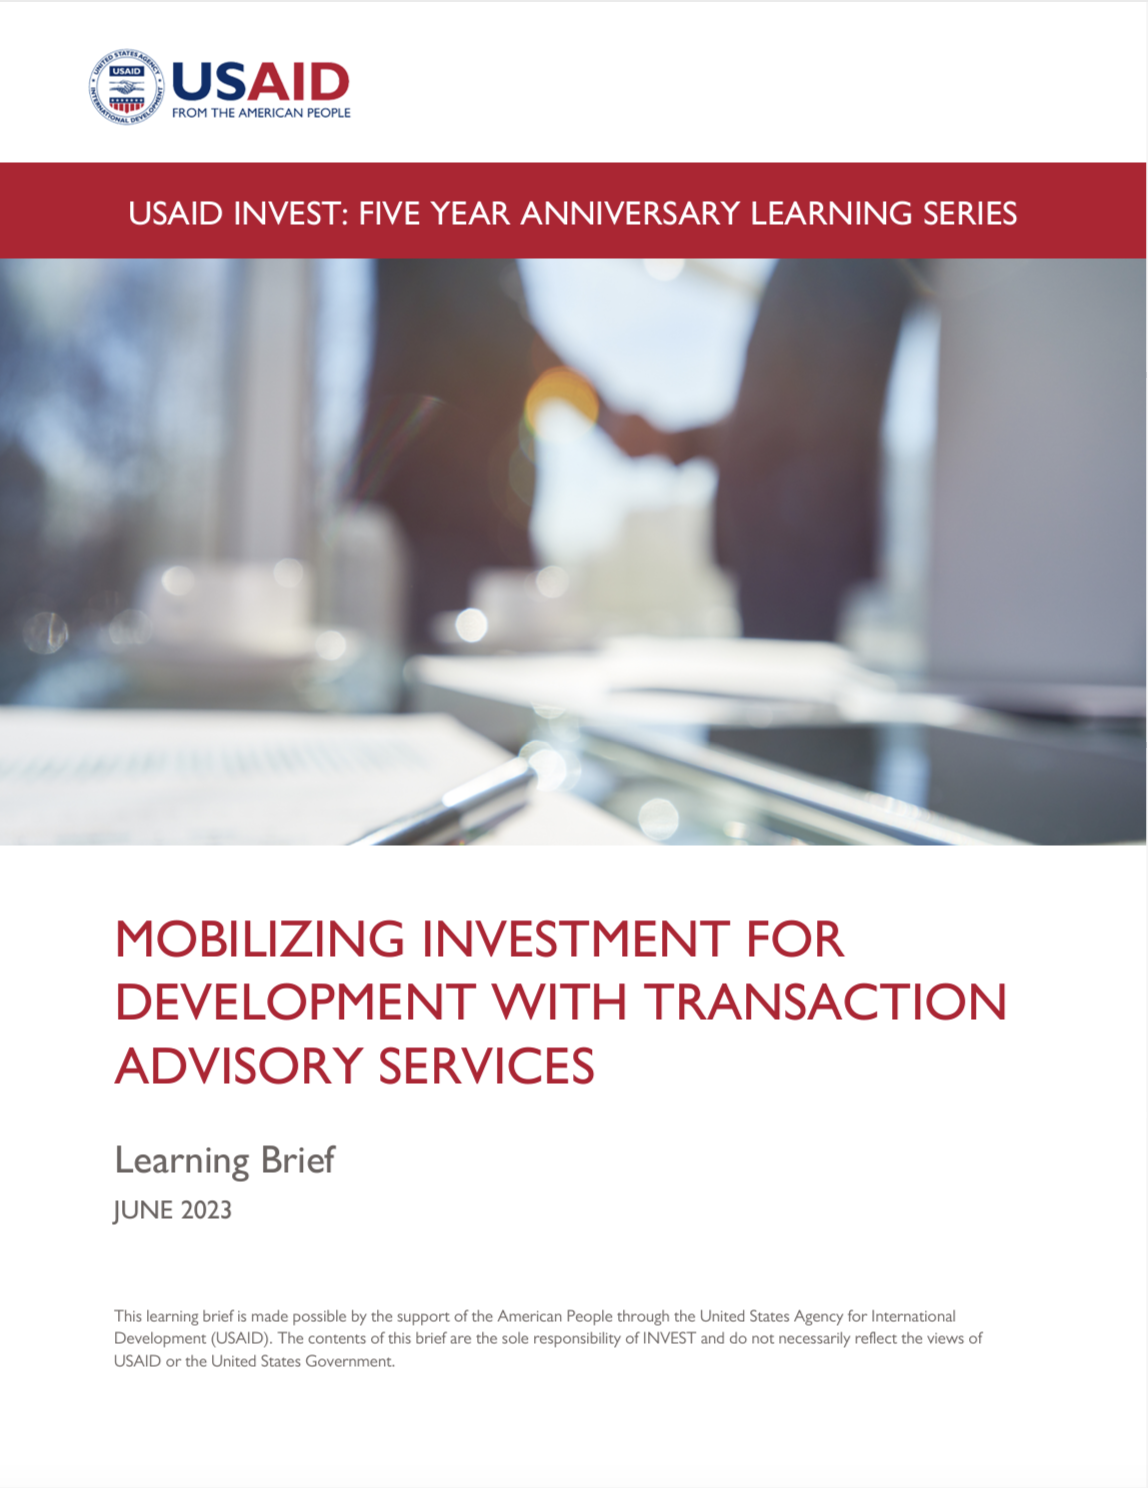 Mobilizing Investment for Development with Transaction Advisory Services: Learning Brief